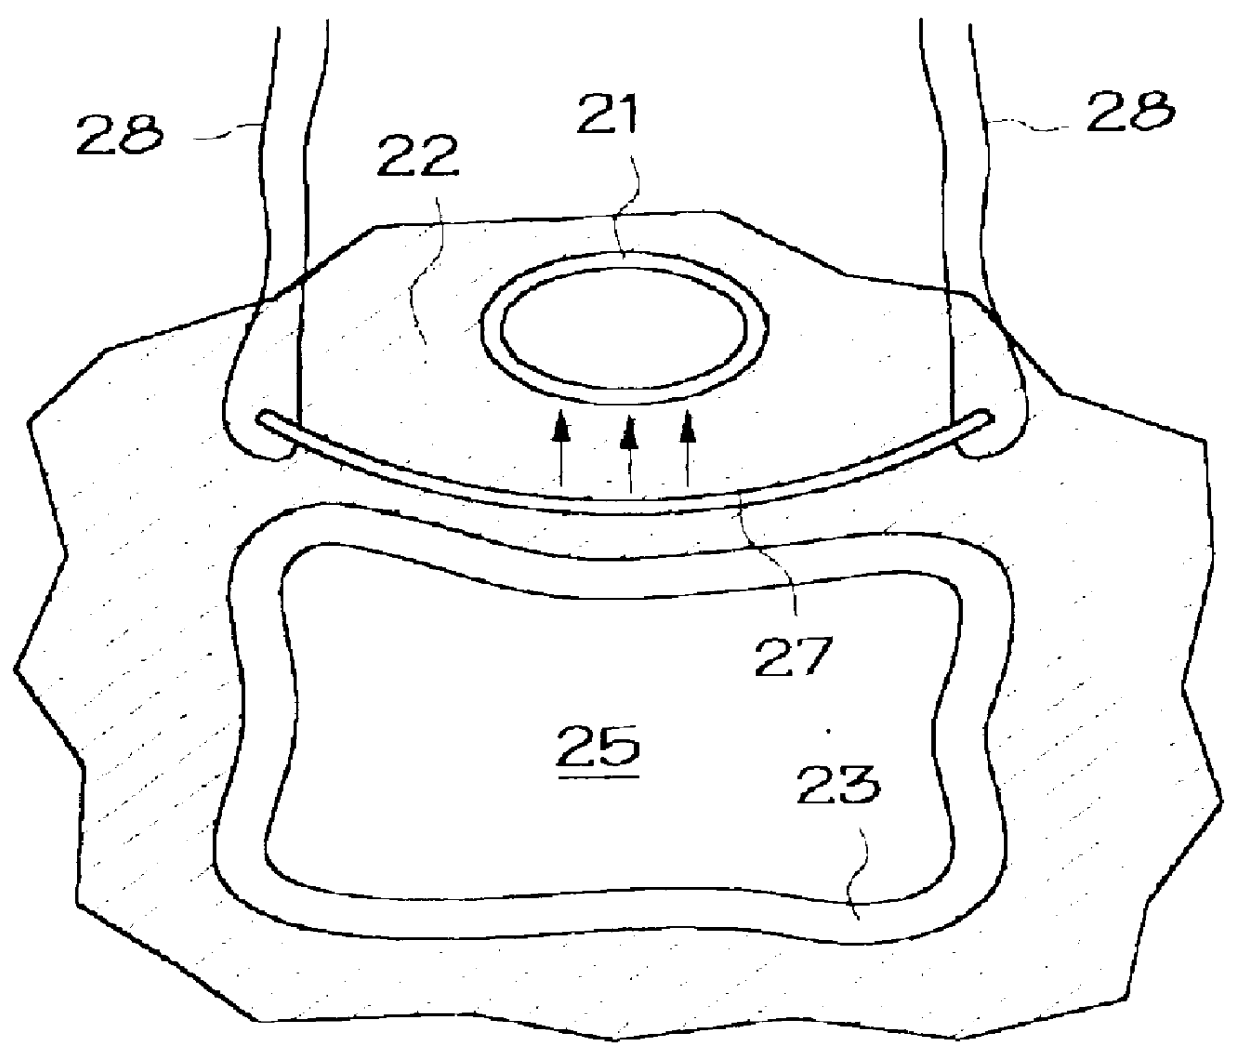 Intraurethral pressure monitoring assembly and method of treating incontinence using same